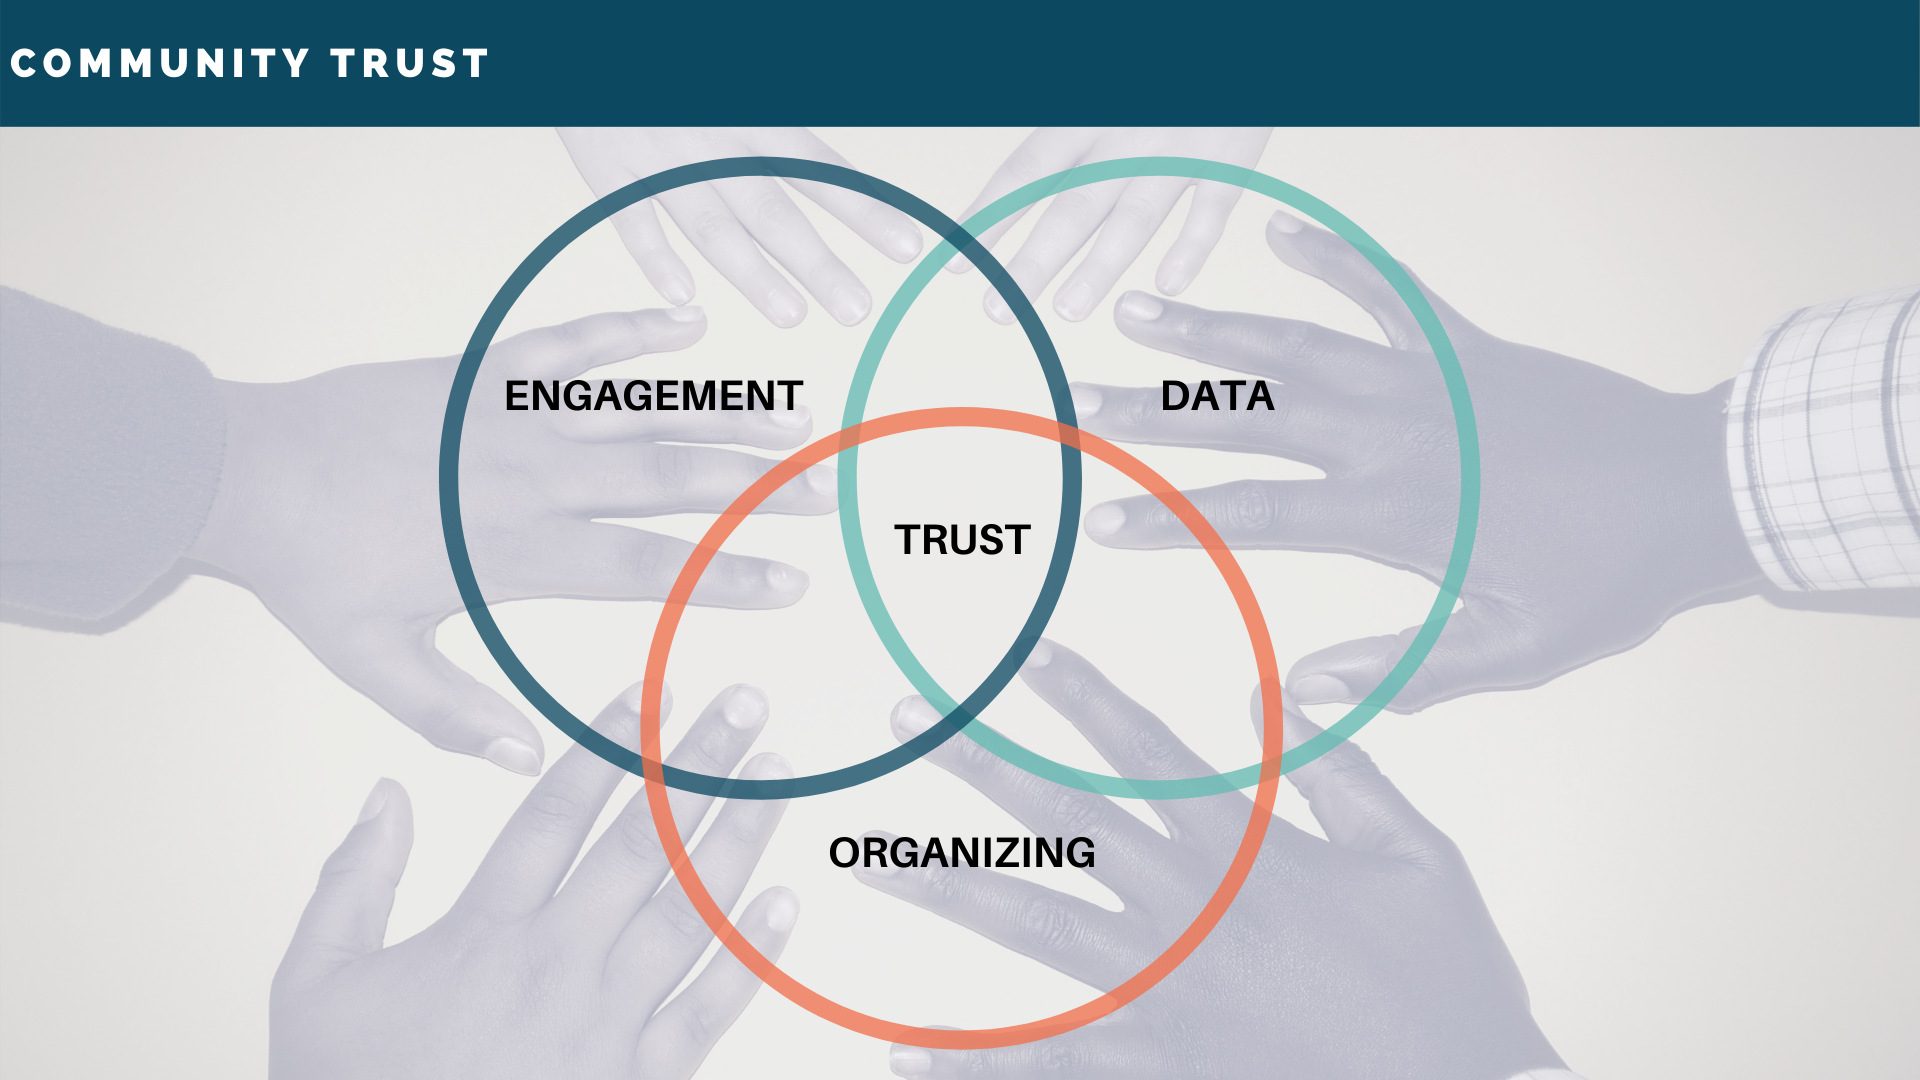  We have a 3 part plan to build community trust:  1) We’ll work with existing community-based organizations, who have built up trust, to get feedback on the pilot, get help galvanizing the community, and work with them to coordinate the community wor